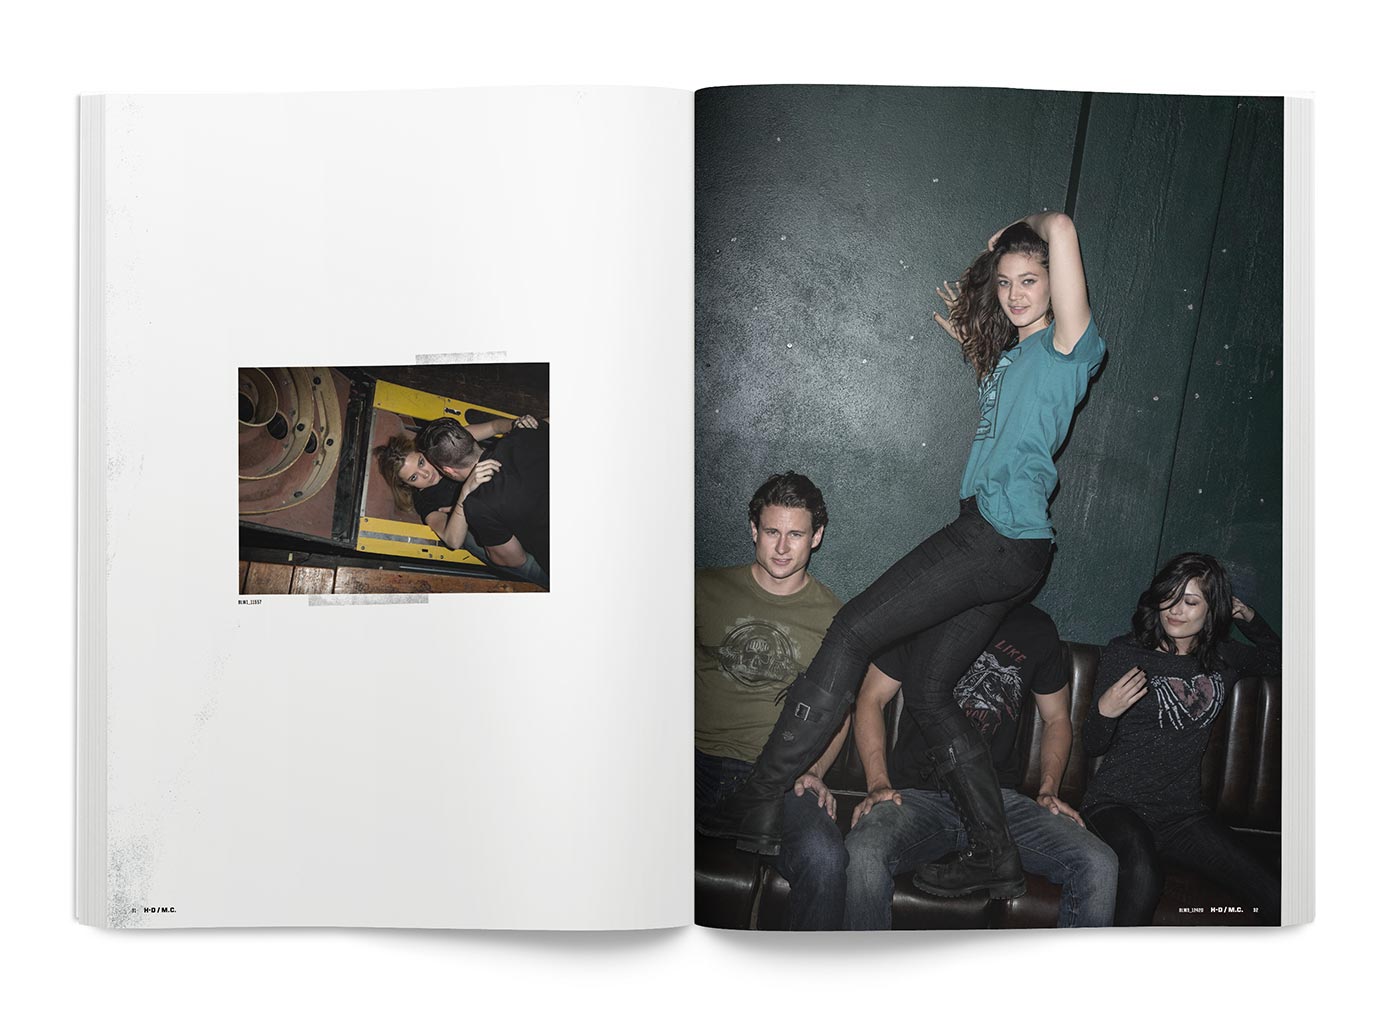 MotorClothes Lifestyle Photography Book Spread